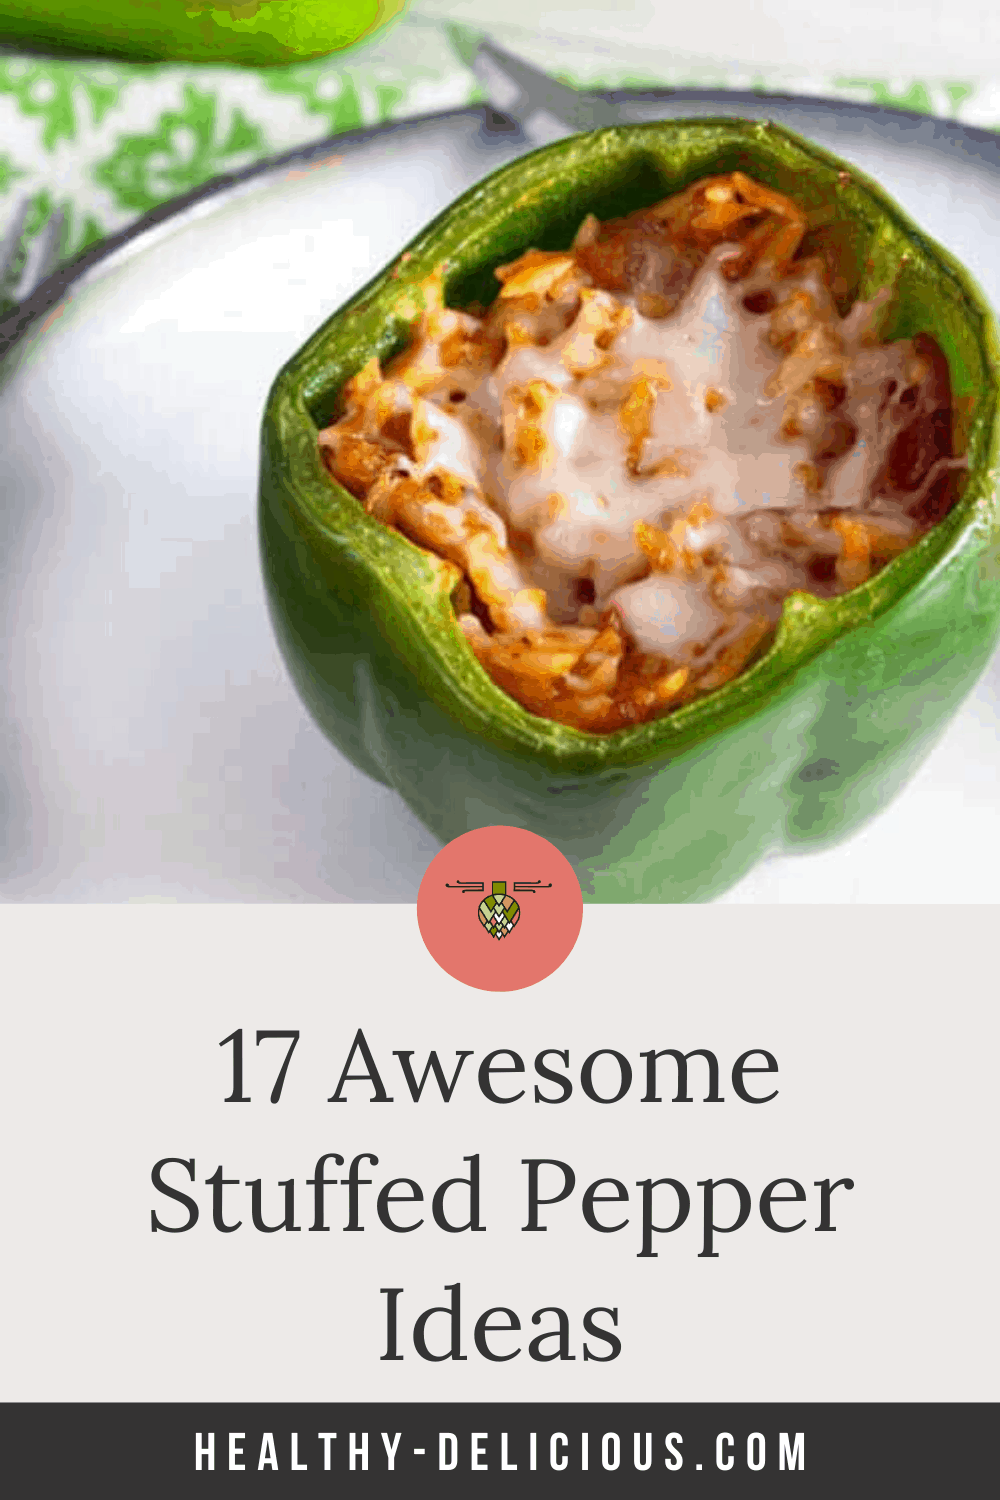 17 healthy stuffed peppers recipes, from classic Italian stuffed peppers to enchilada stuffed peppers to low carb stuffed pepper soup made with cauliflower rice via @HealthyDelish